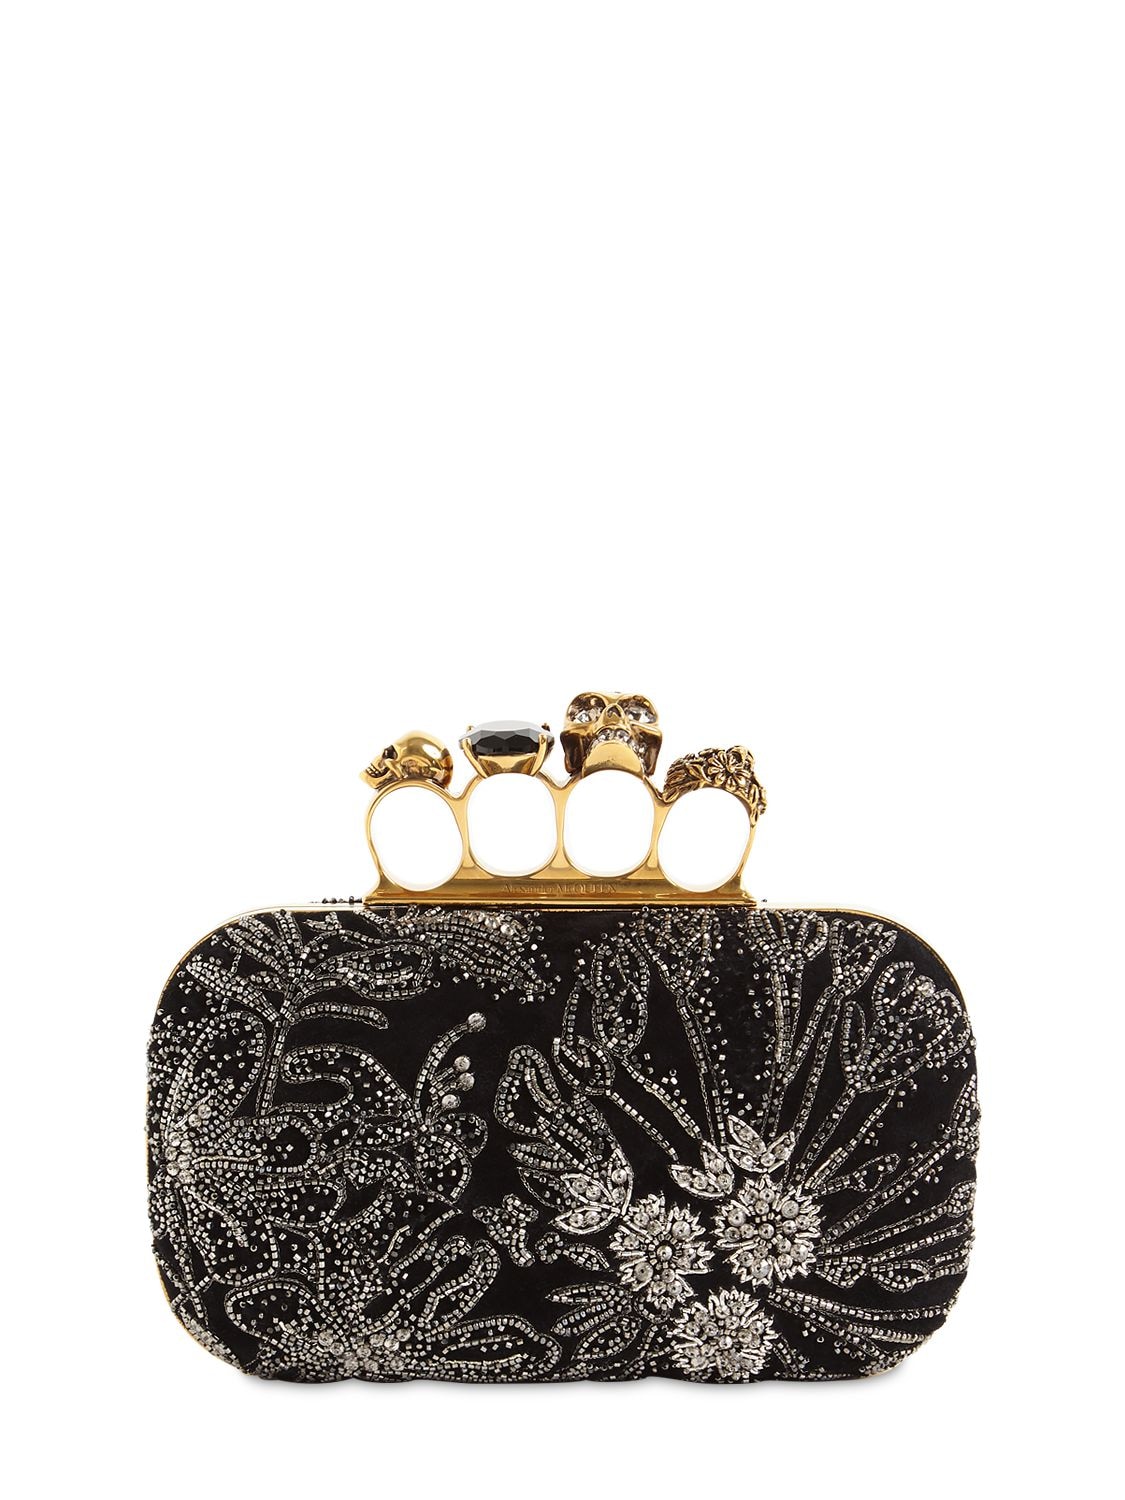 ALEXANDER MCQUEEN 4-RING EMBELLISHED LEATHER CLUTCH,71IRL6015-ODQ5MA2